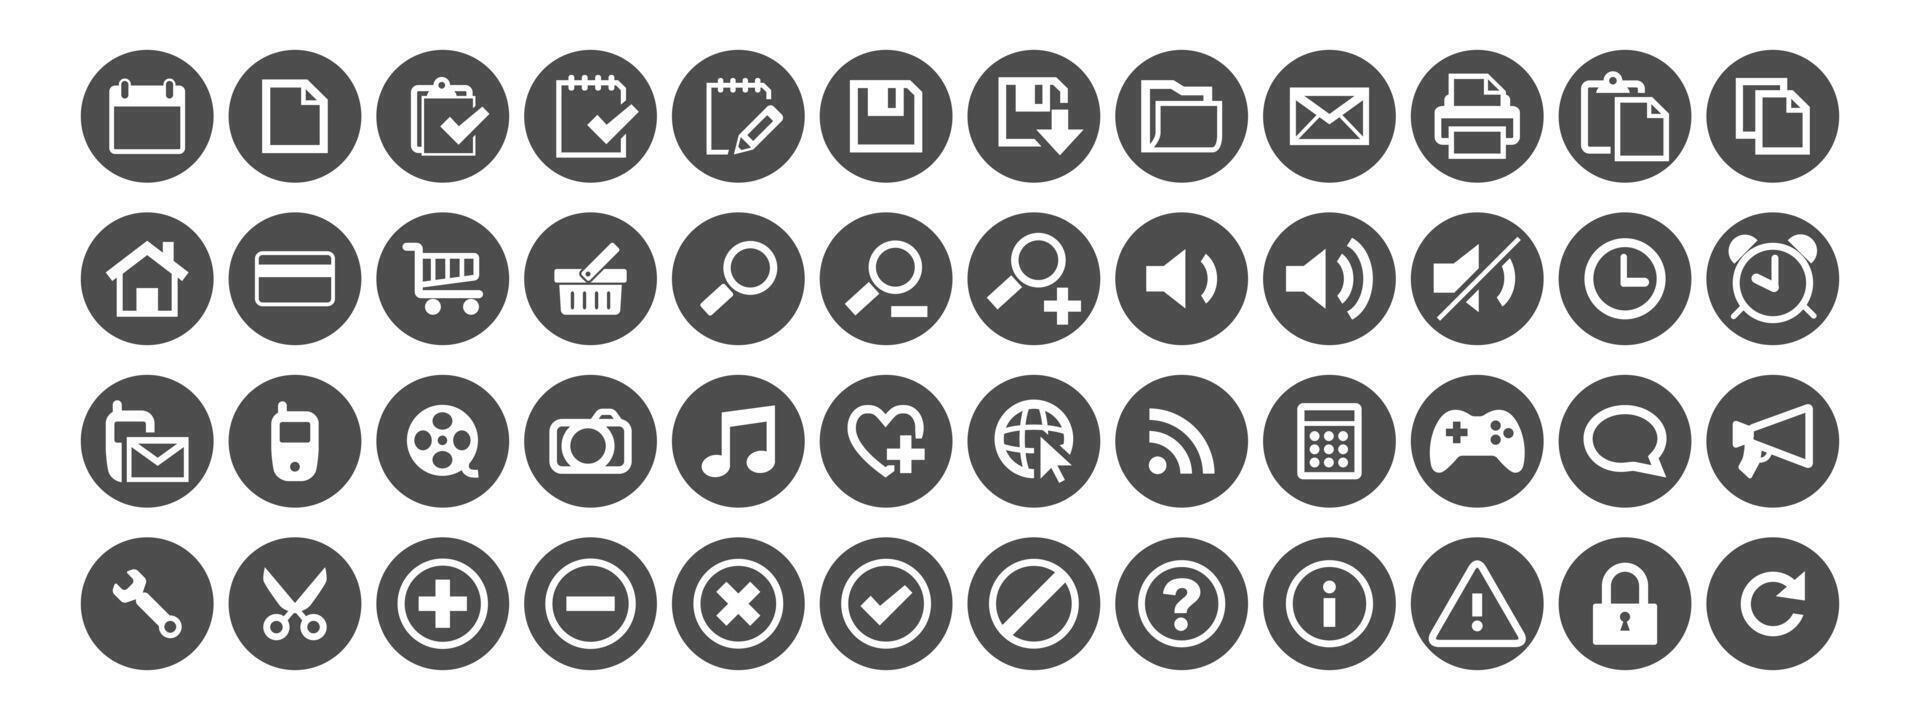 Big set of web business icons. Flat round icons. Internet resource, design elements for any business. Vector